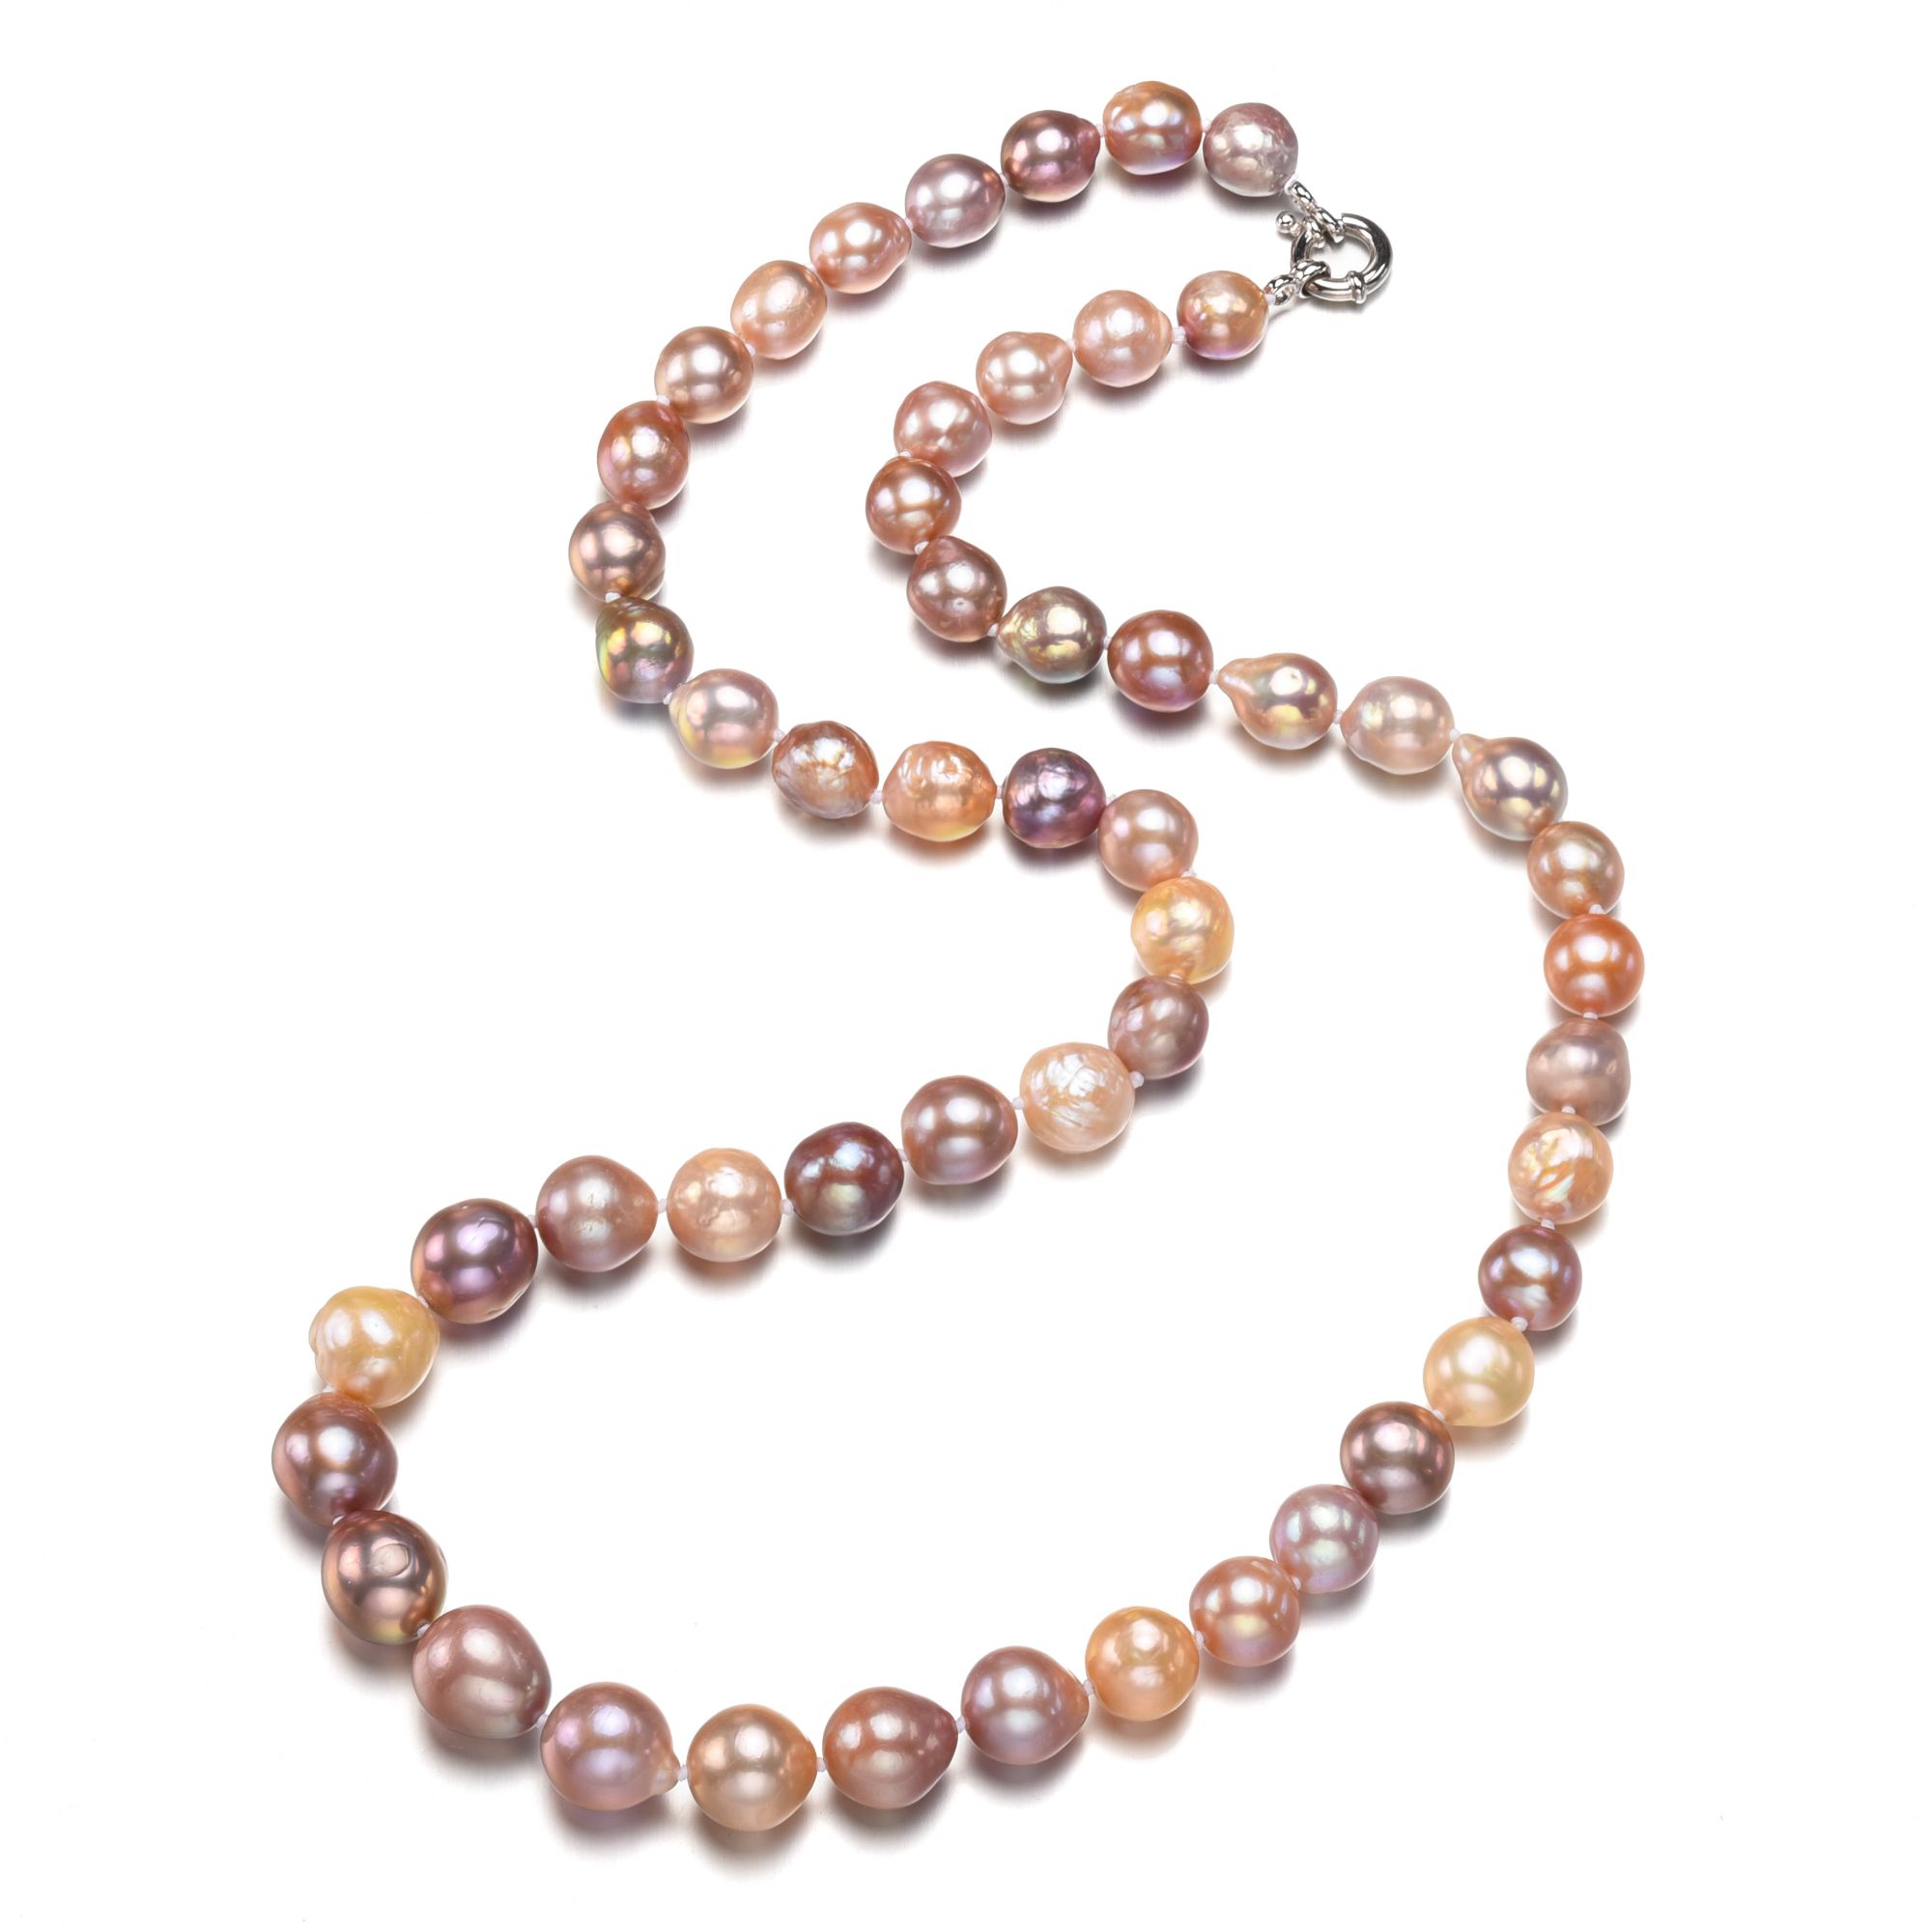 8-12mm mixed color metalic unique graduated bridal fresh water real knotted pearl necklace